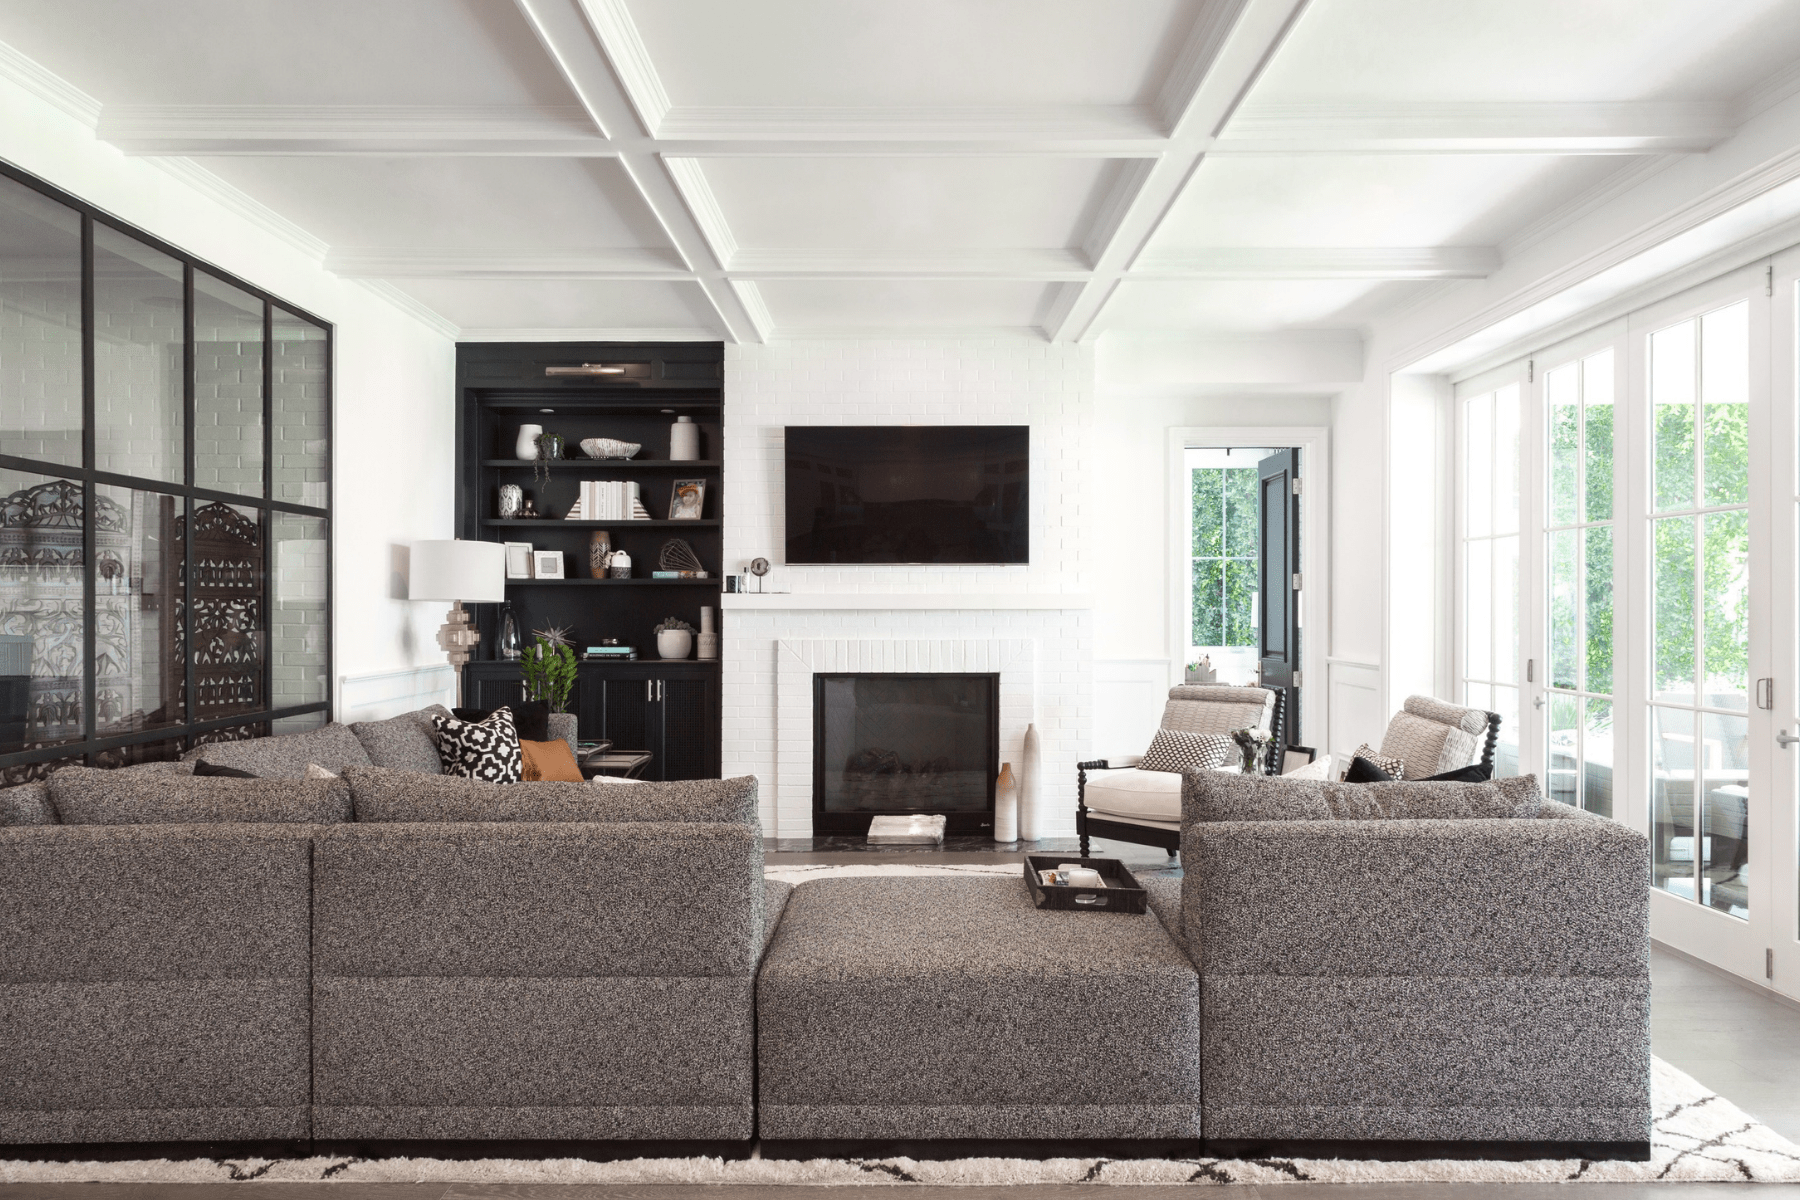 The Encino living room features a detailed ceiling above a mix of relaxed furnishings.